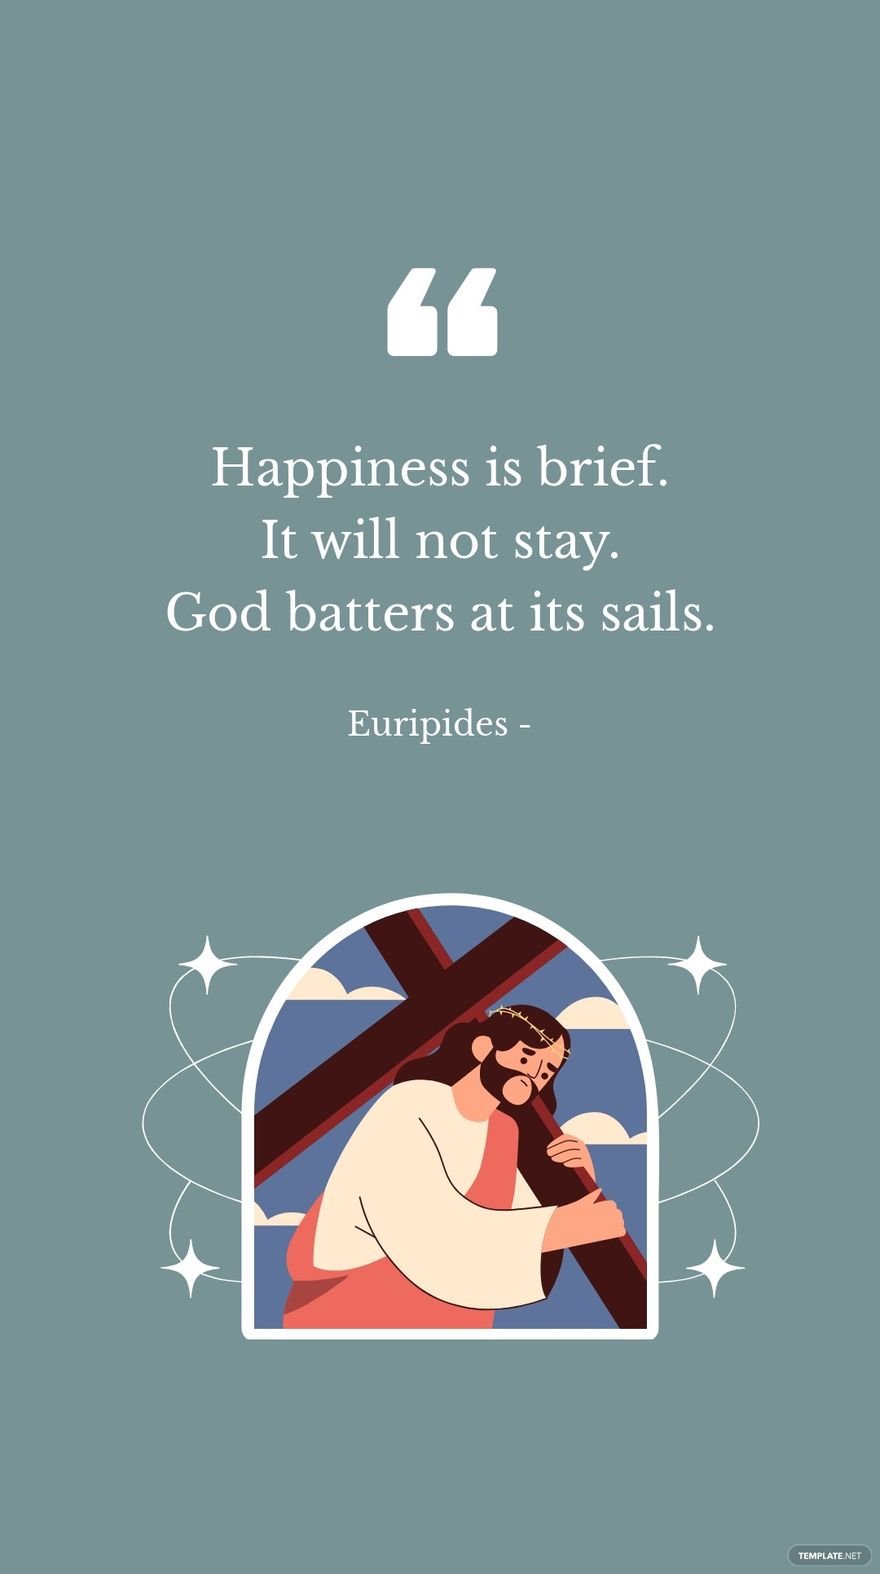 Free Euripides - Happiness is brief. It will not stay. God batters at its sails.